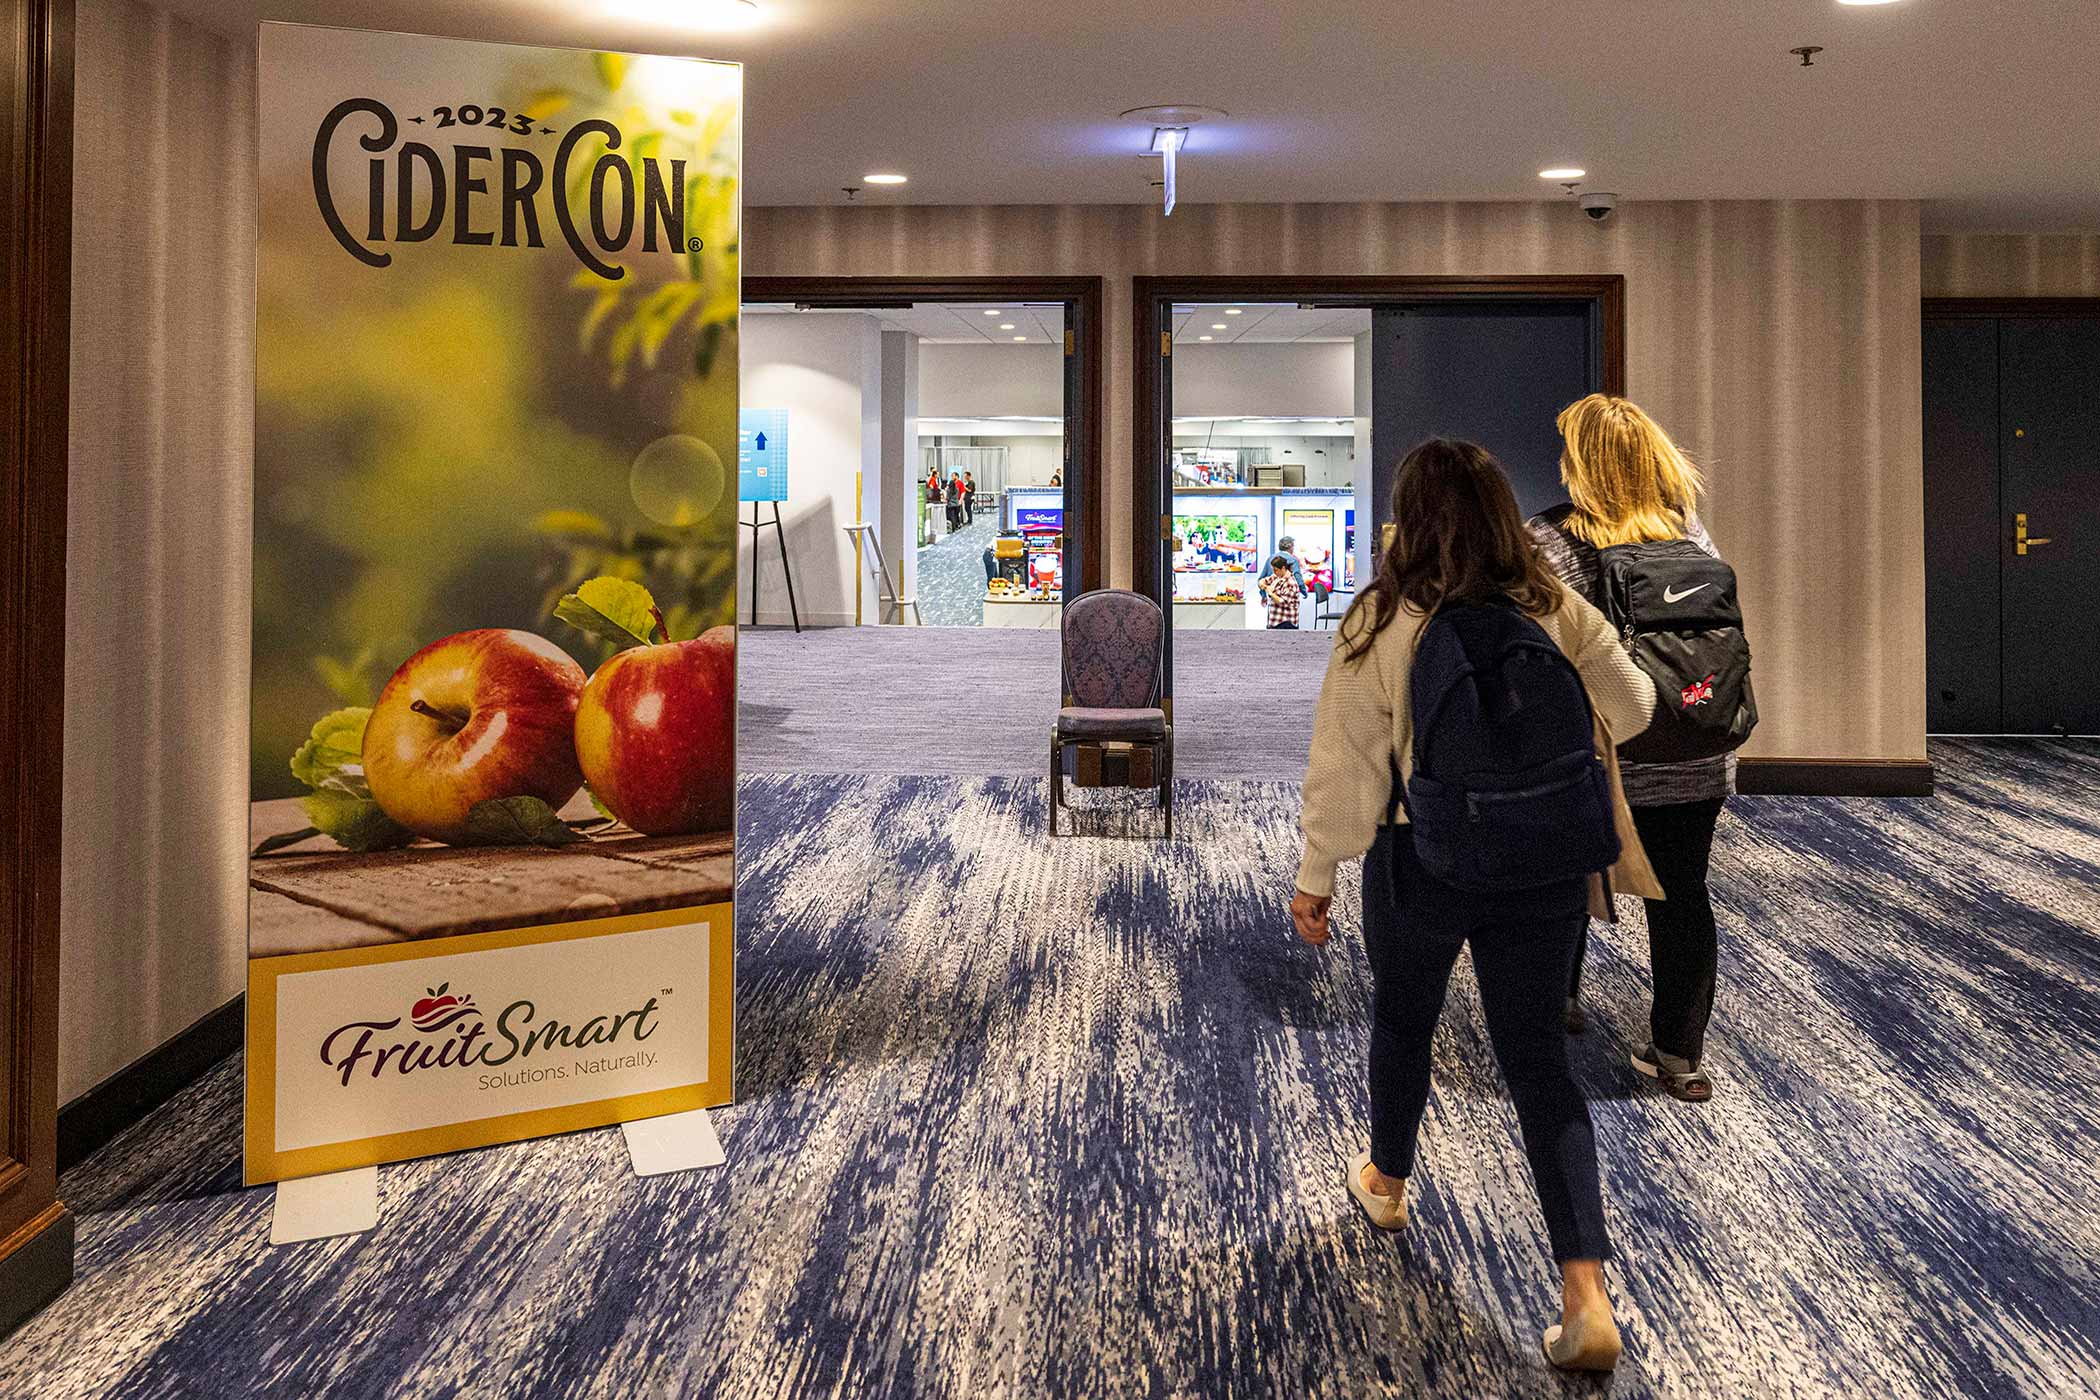 8 Things a Beer Writer Learned at CiderCon